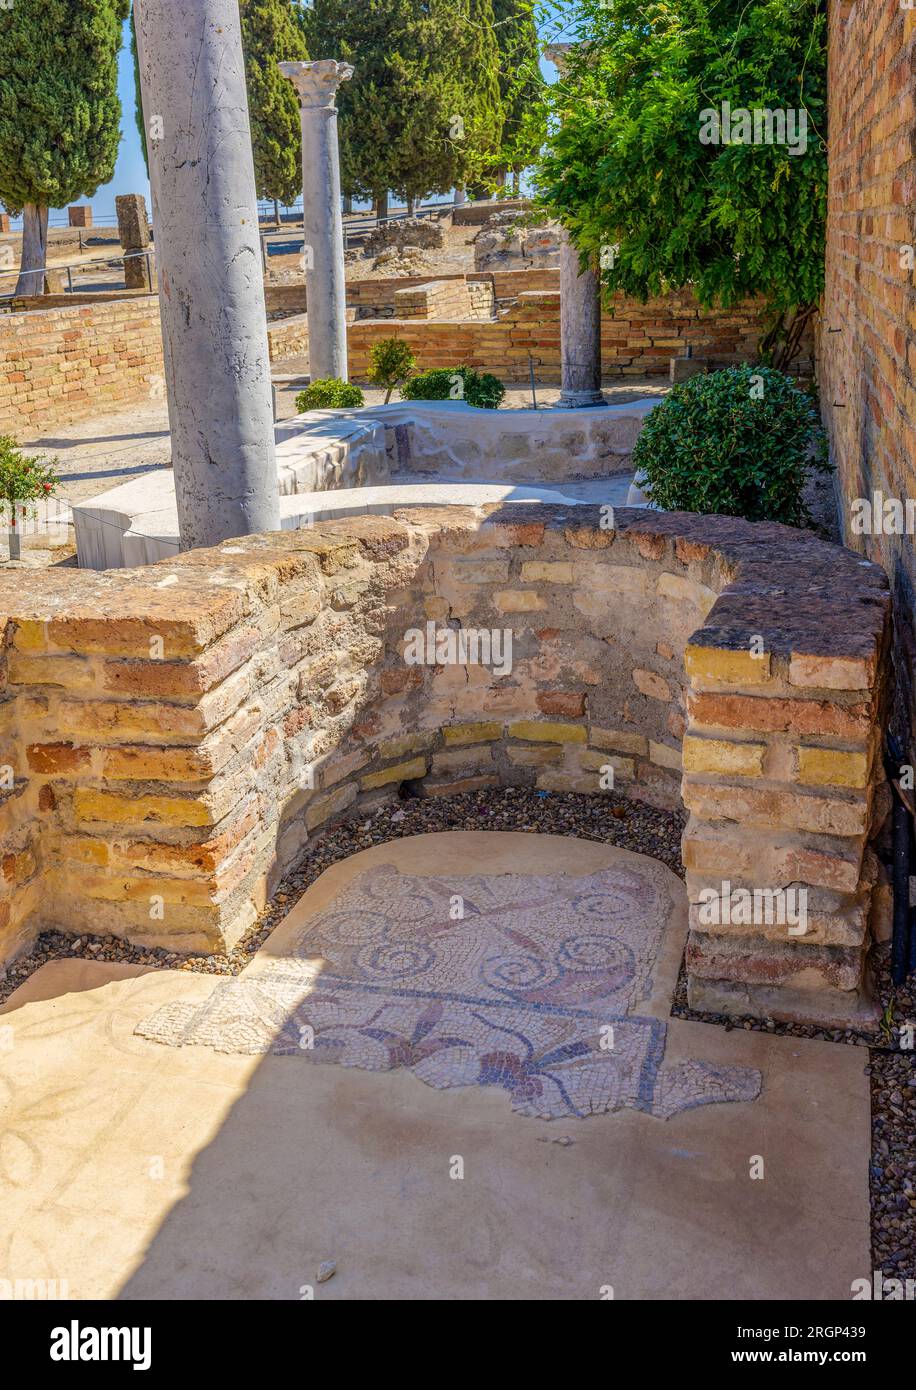 The Roman city of Italica. Santiponce, Andalusia, Spain. Stock Photo